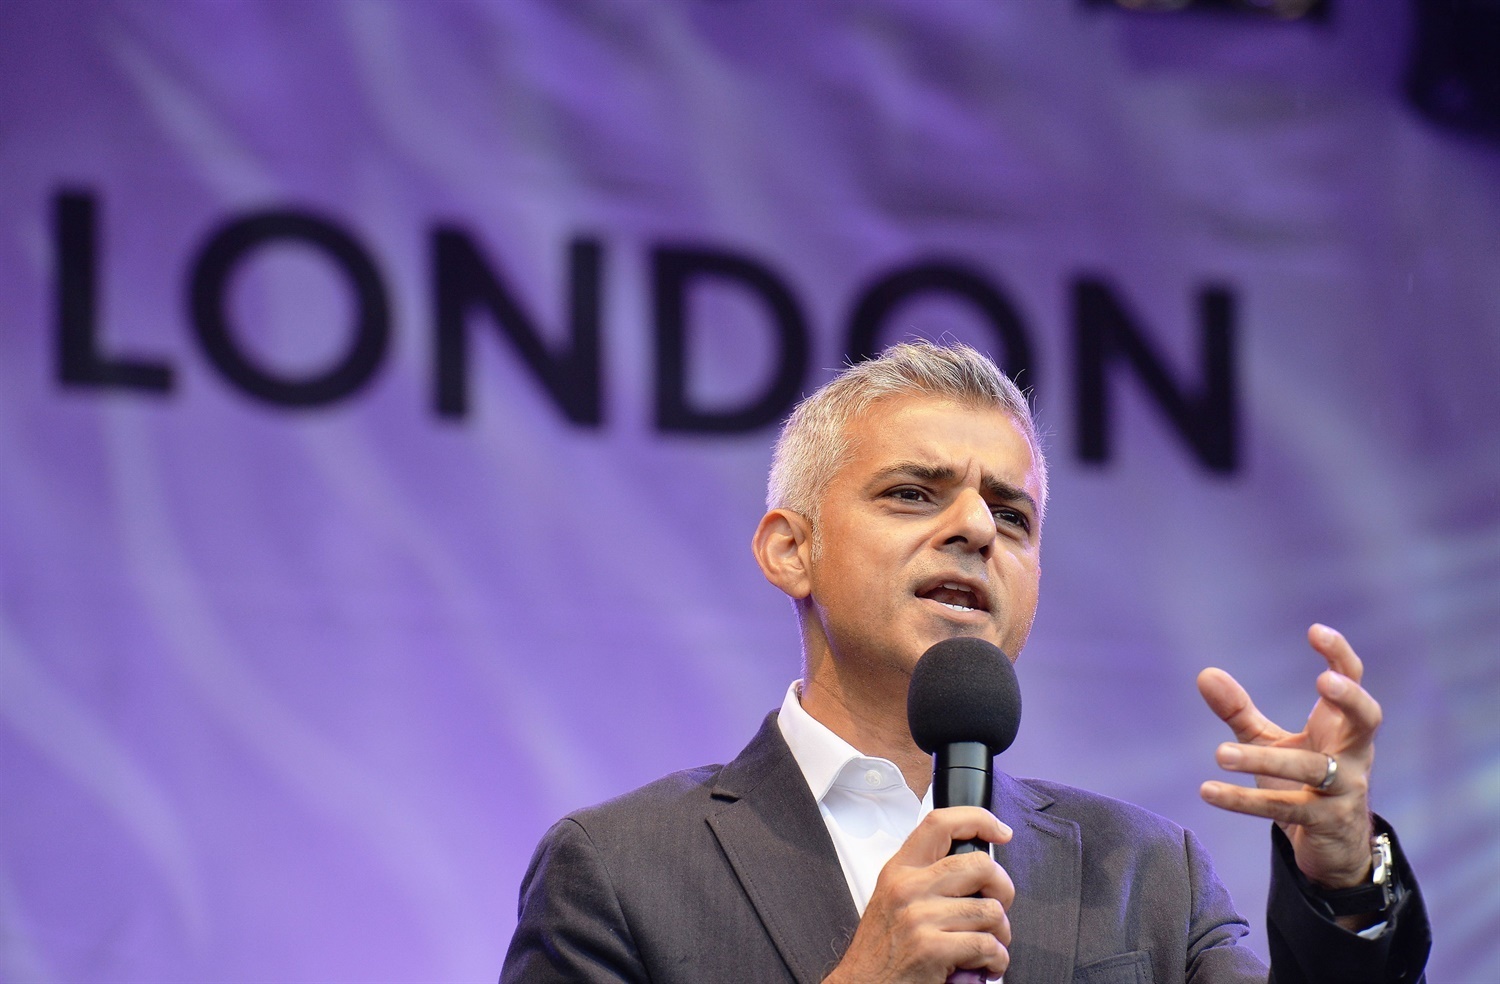 Khan asserts commitment to West London Overground extension in transport strategy